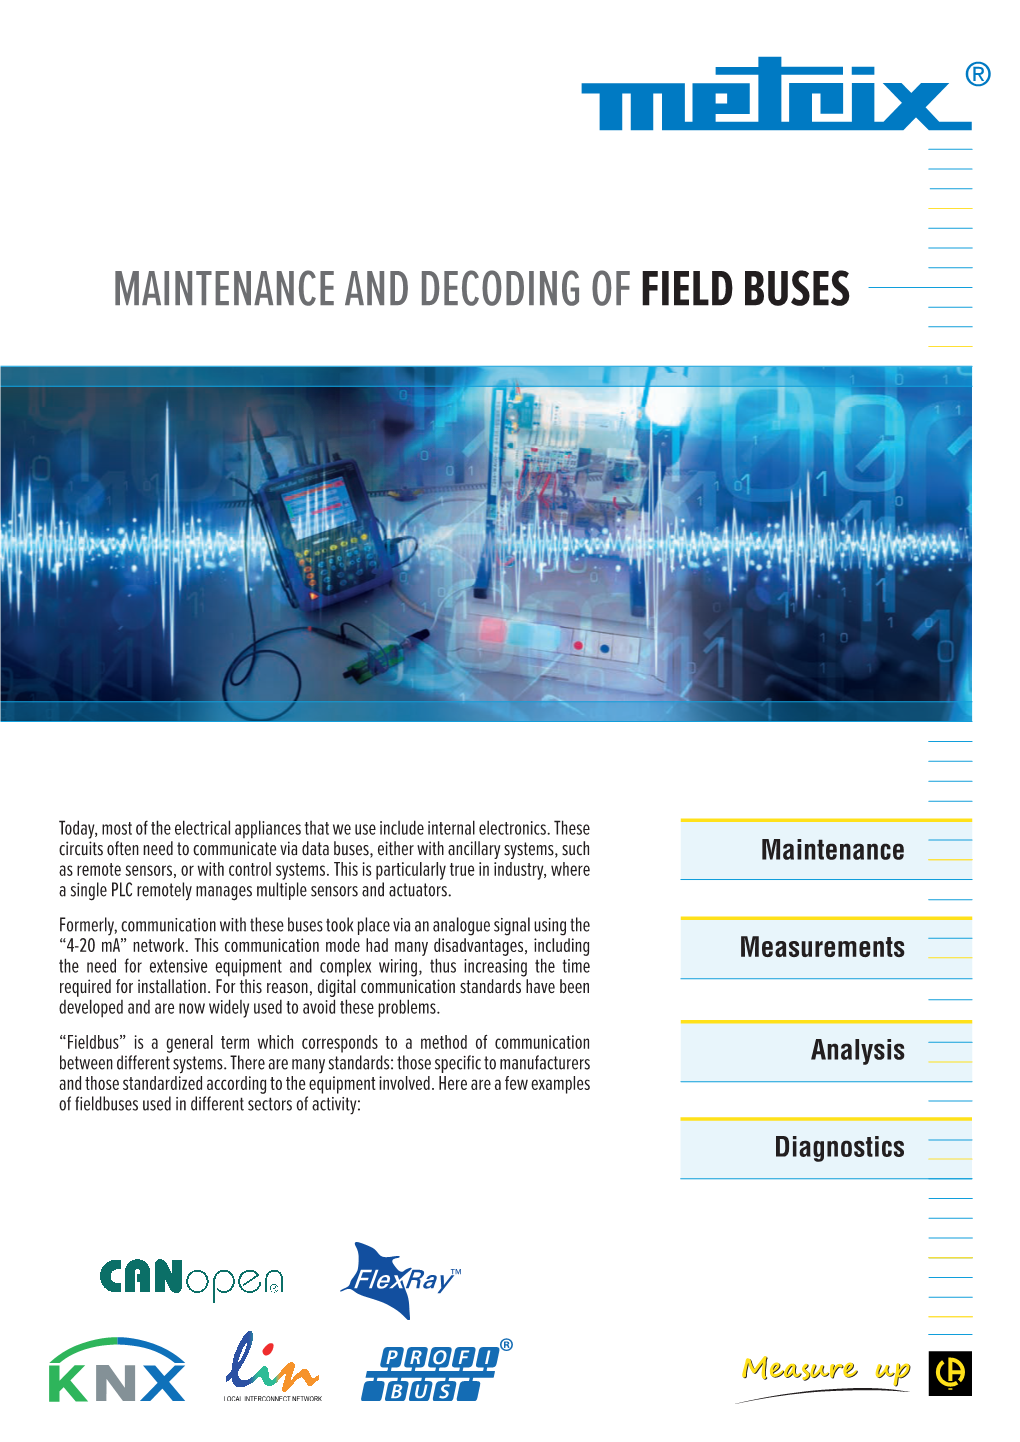 Maintenance and Decoding of Field Buses